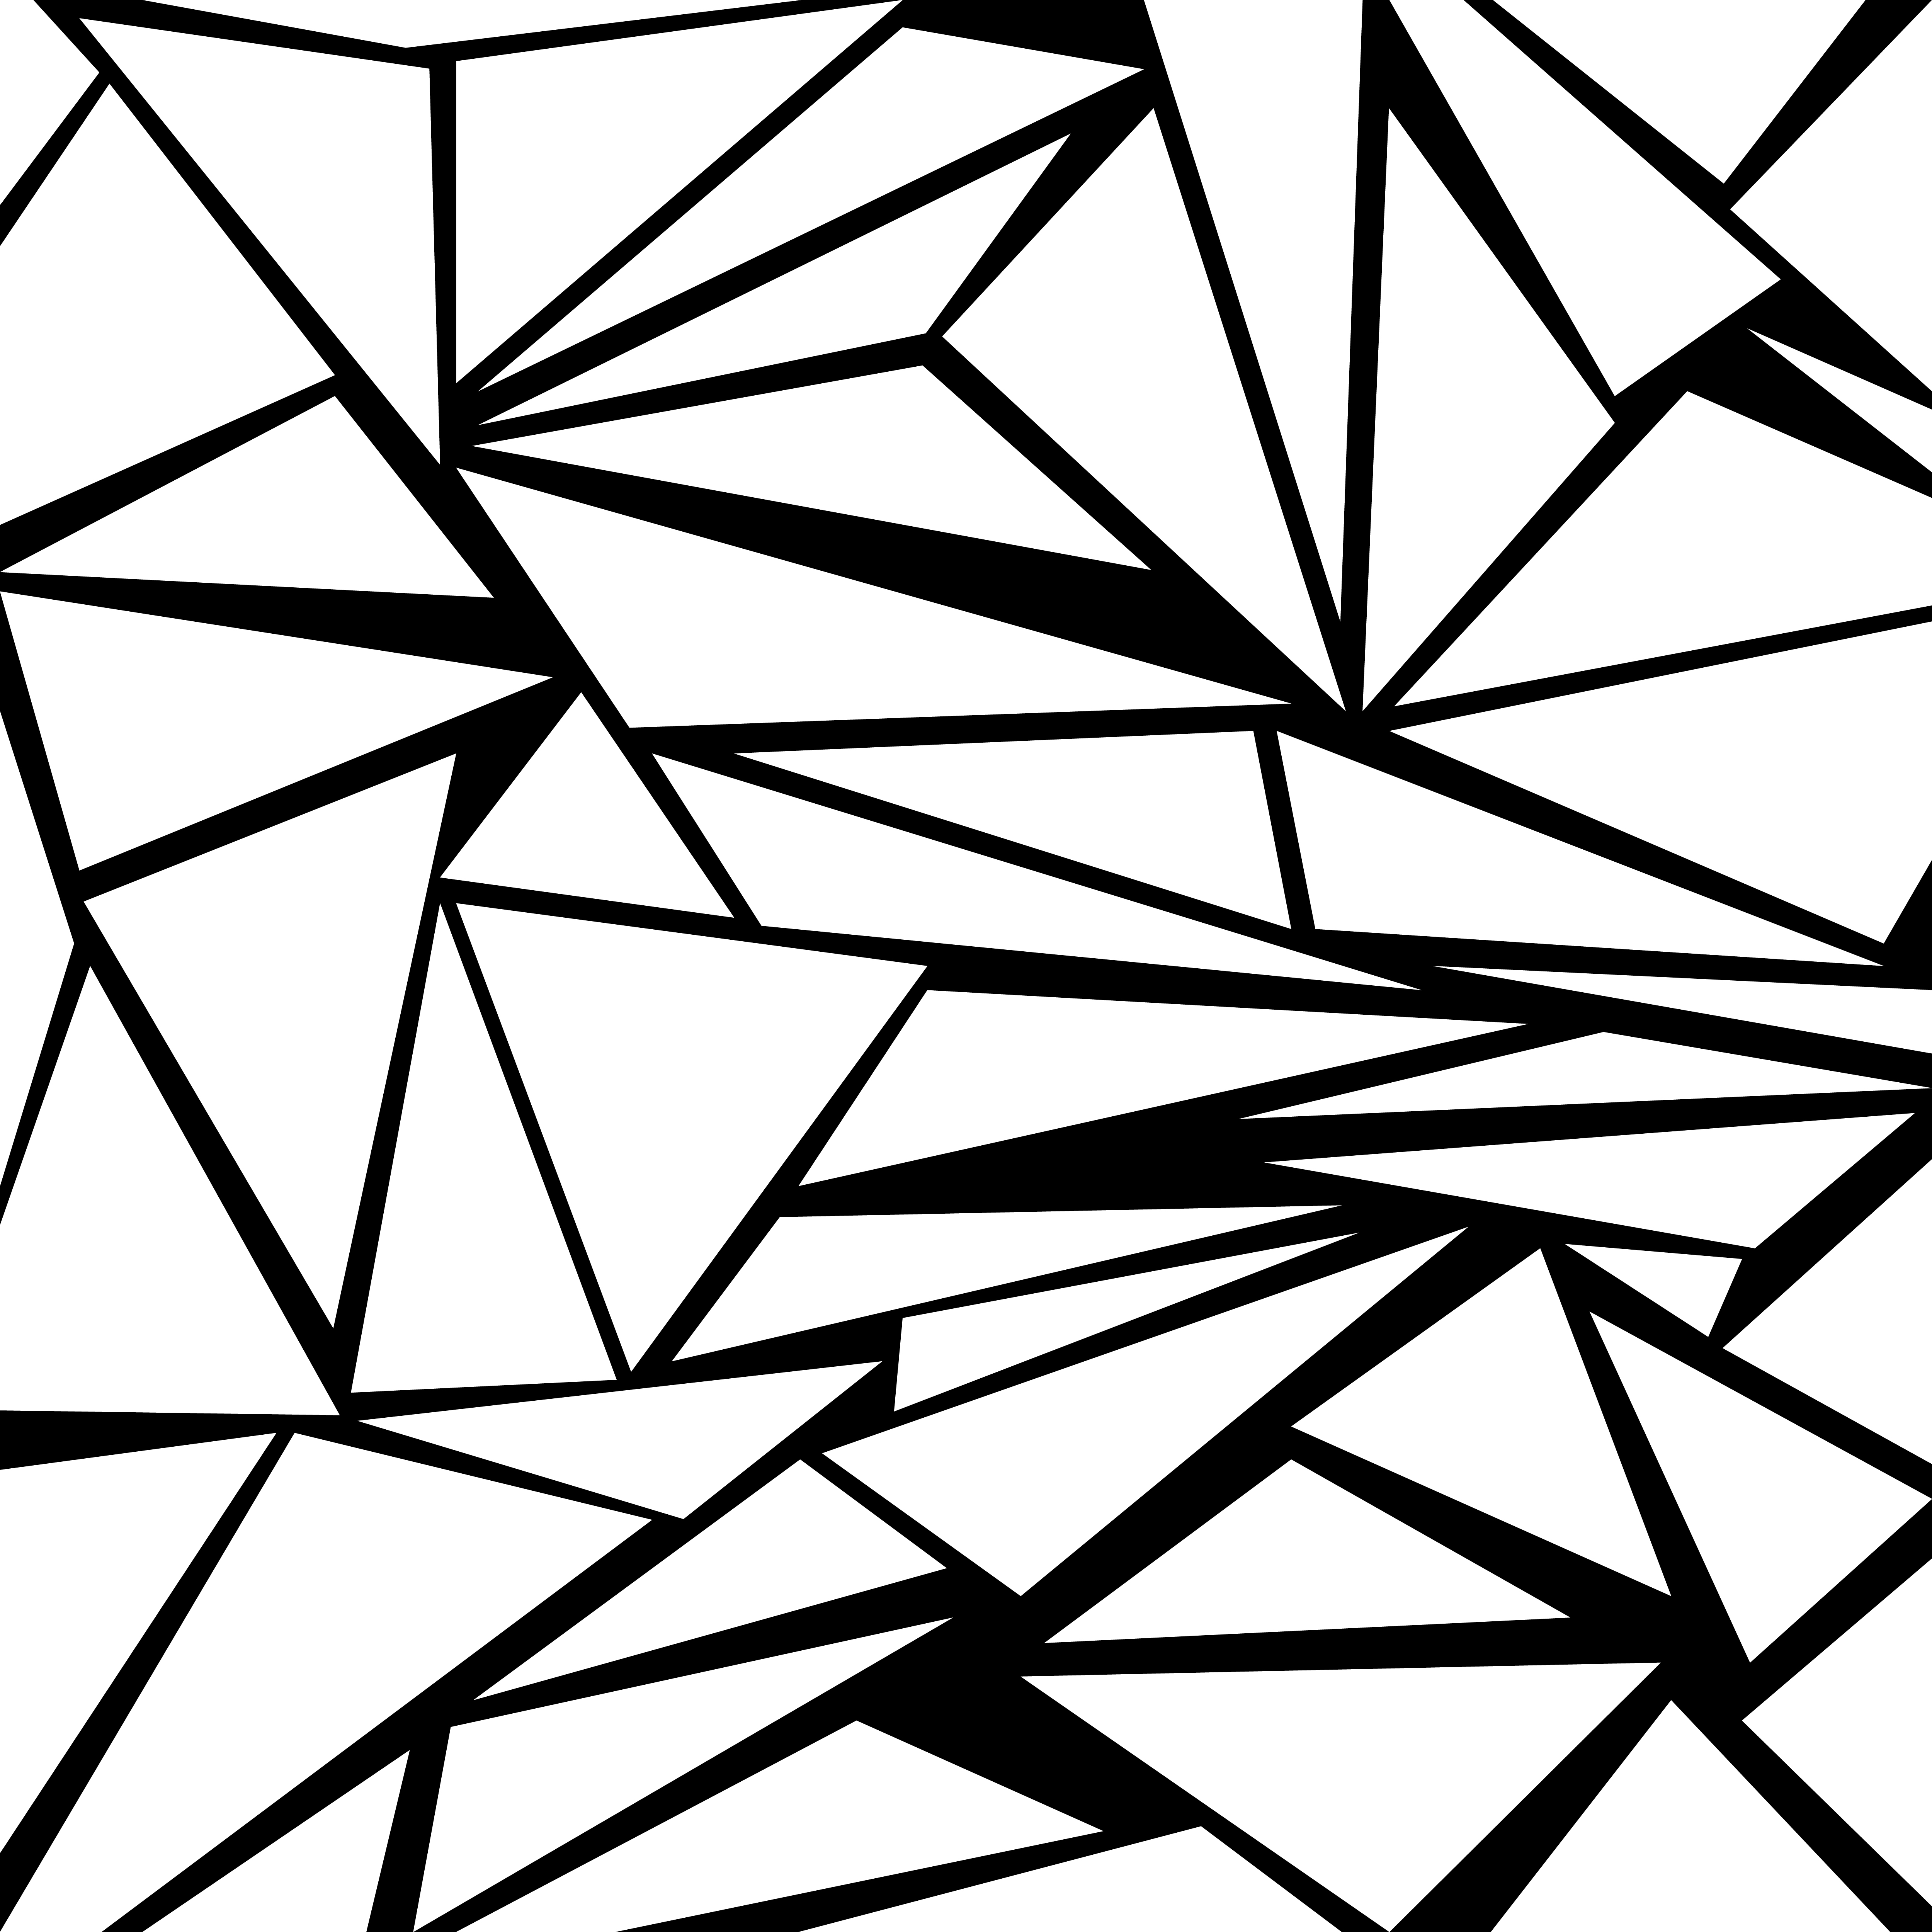 White and black geometric background with tr
iangle shapes 625659 Vector